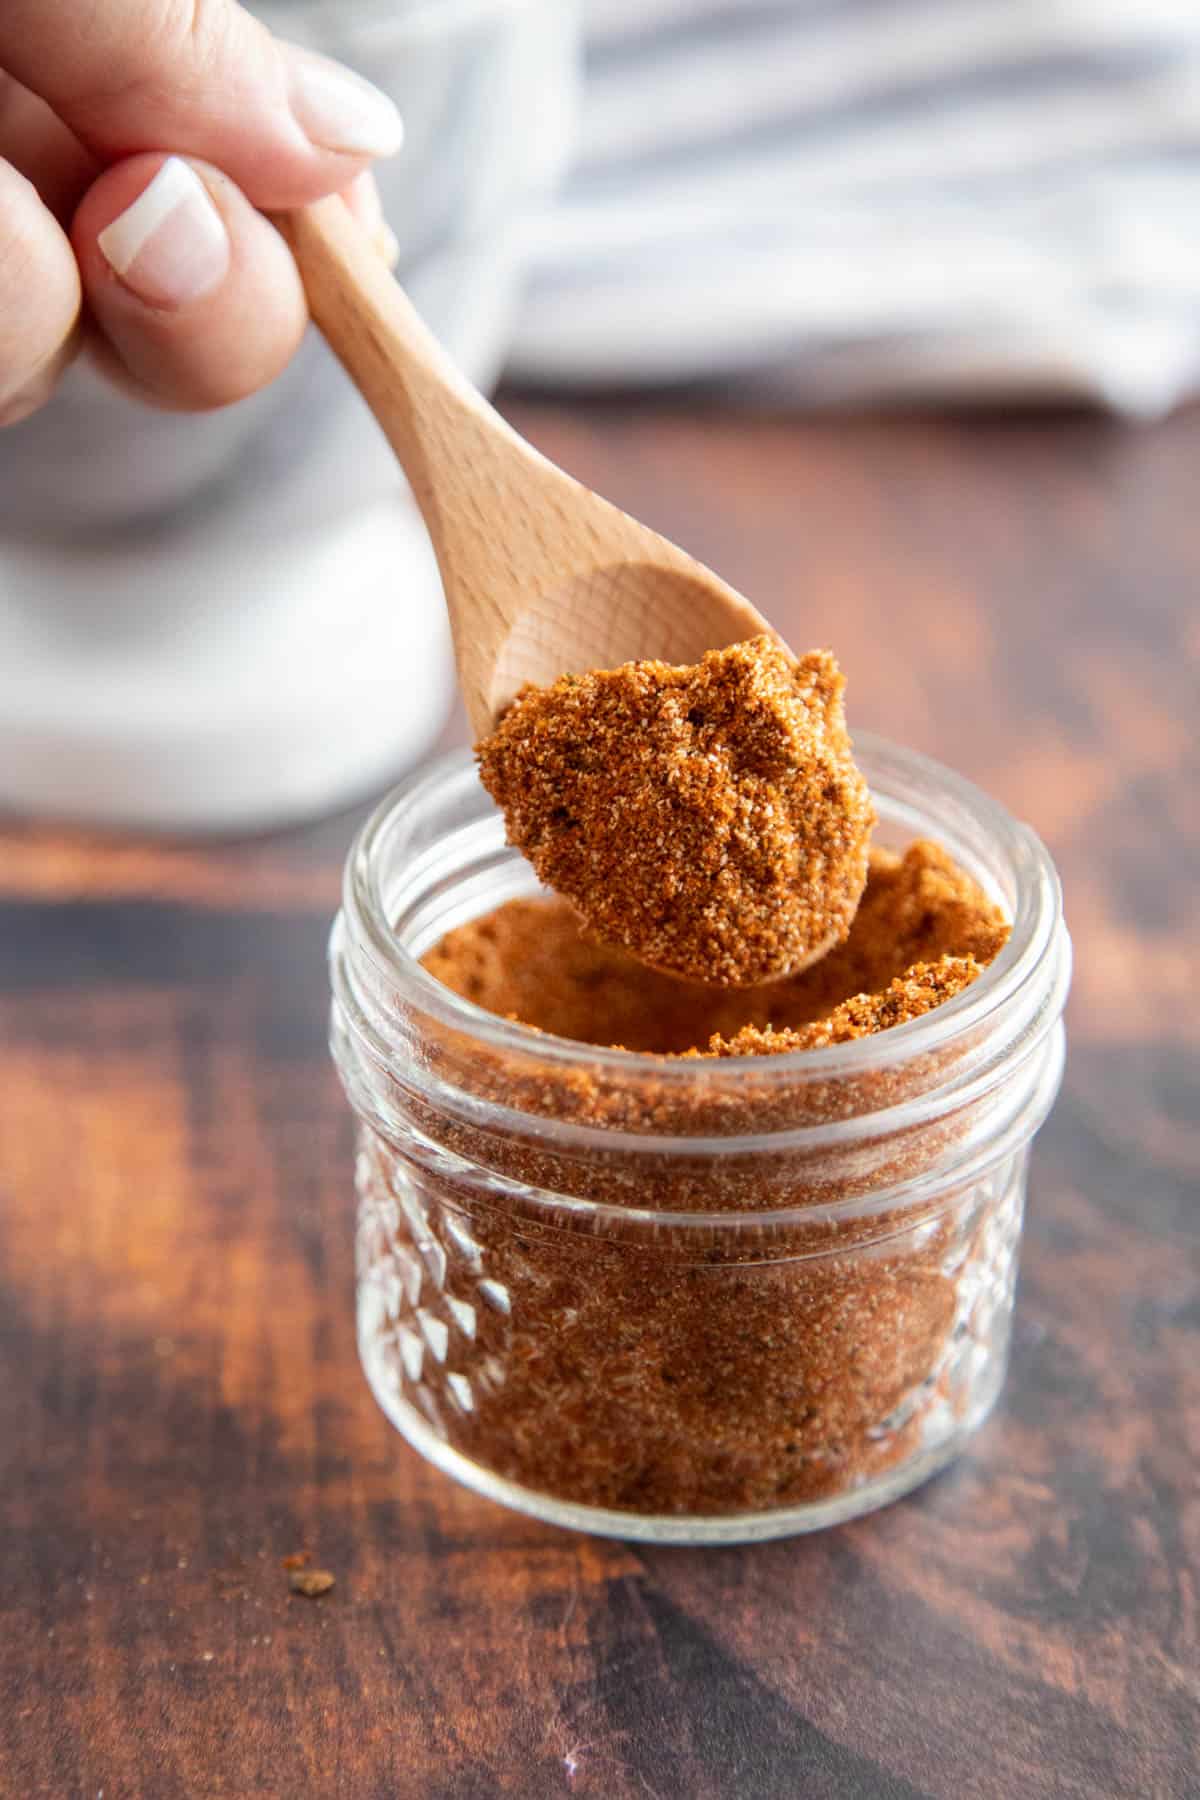 chili powder in a glass jar with a wooden spoon